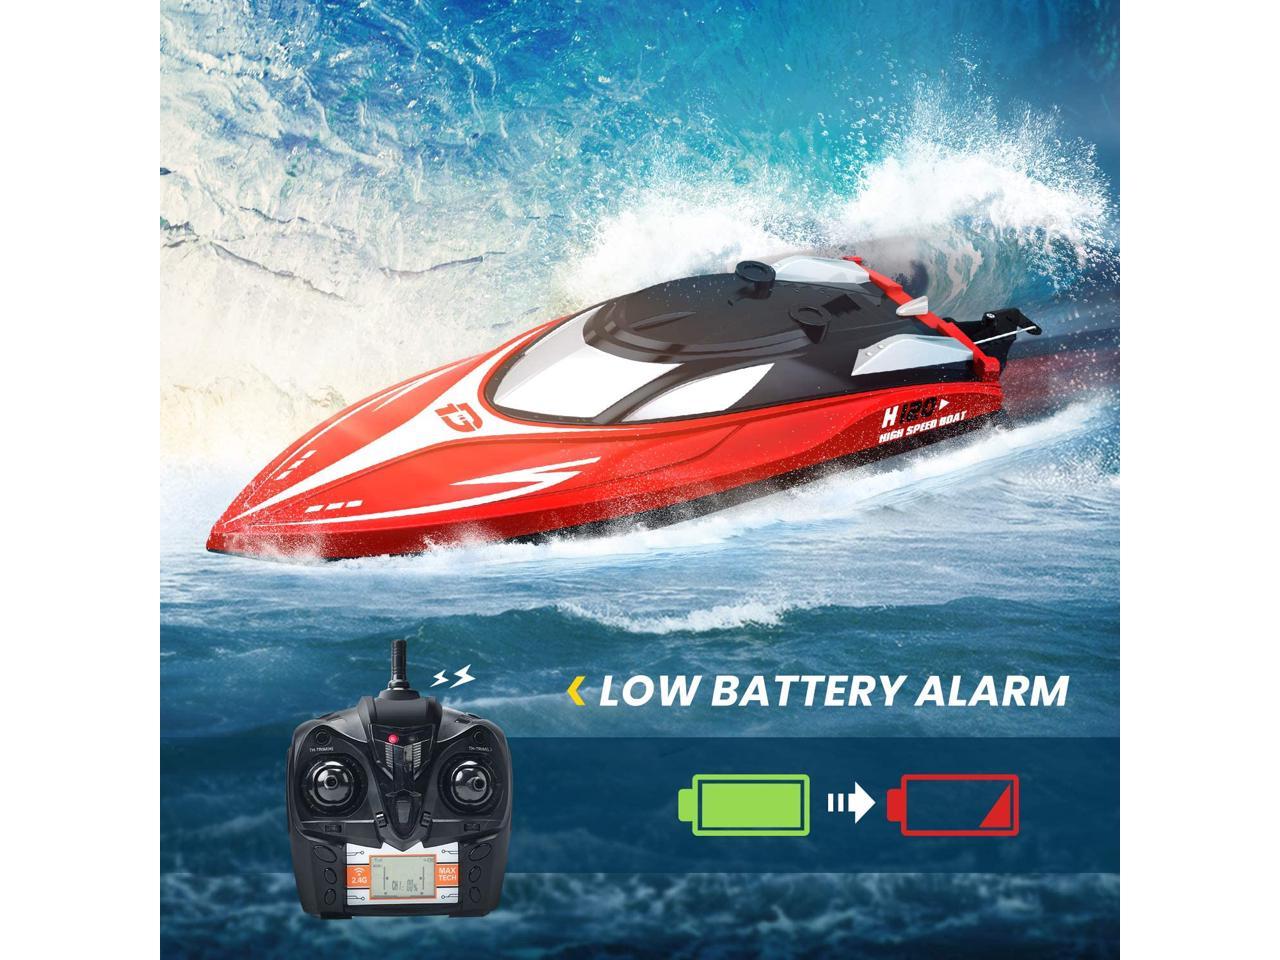 Details about   DEERC Remote Control Boat for Pools & Lakes RC Racing Boat High Speed 20 MPH 